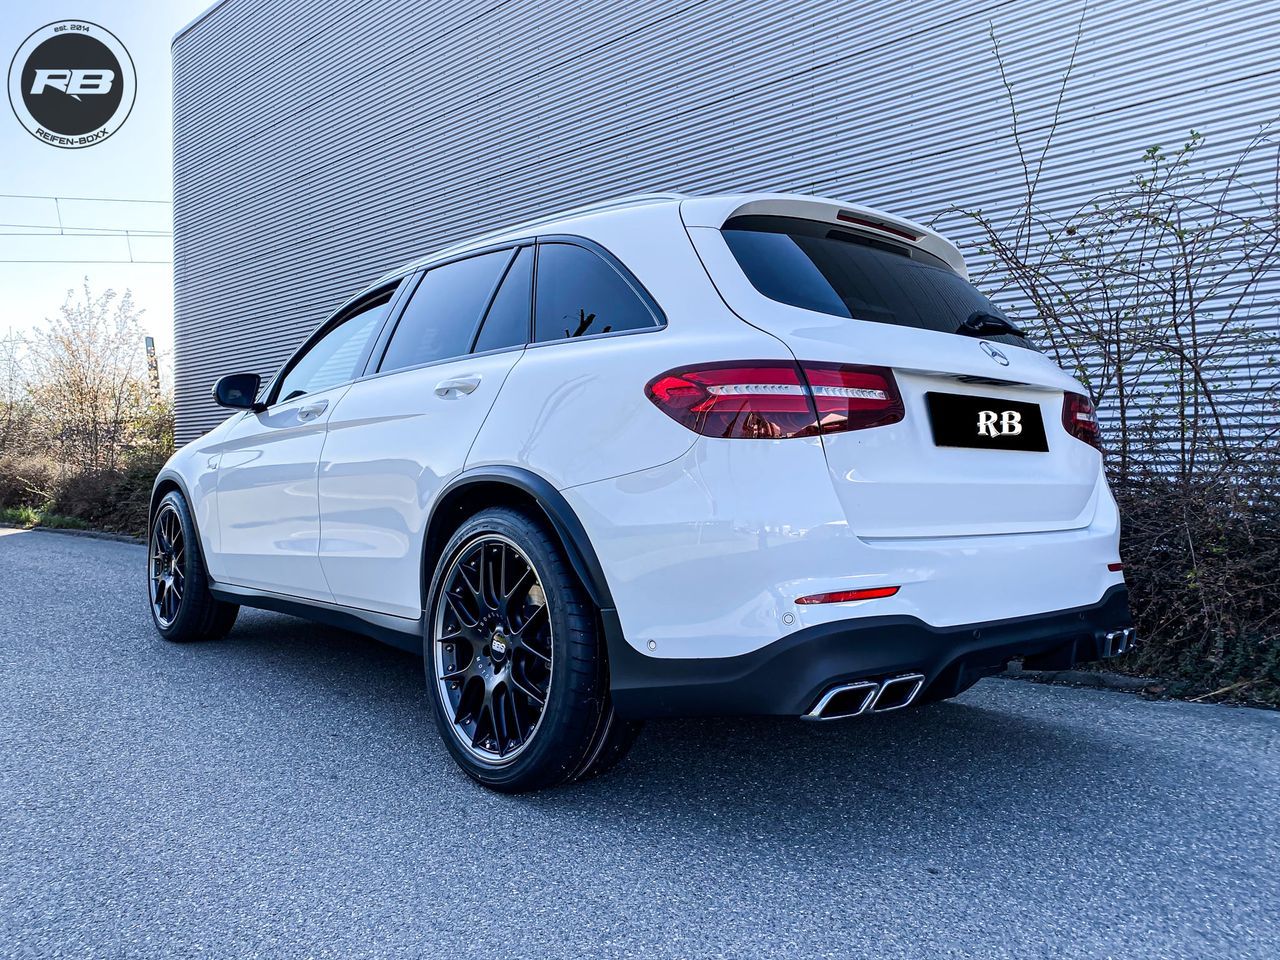 Mercedes-Benz GLC X253/C253 with 21×9 and 21×9.5-inch BBS CH-R II